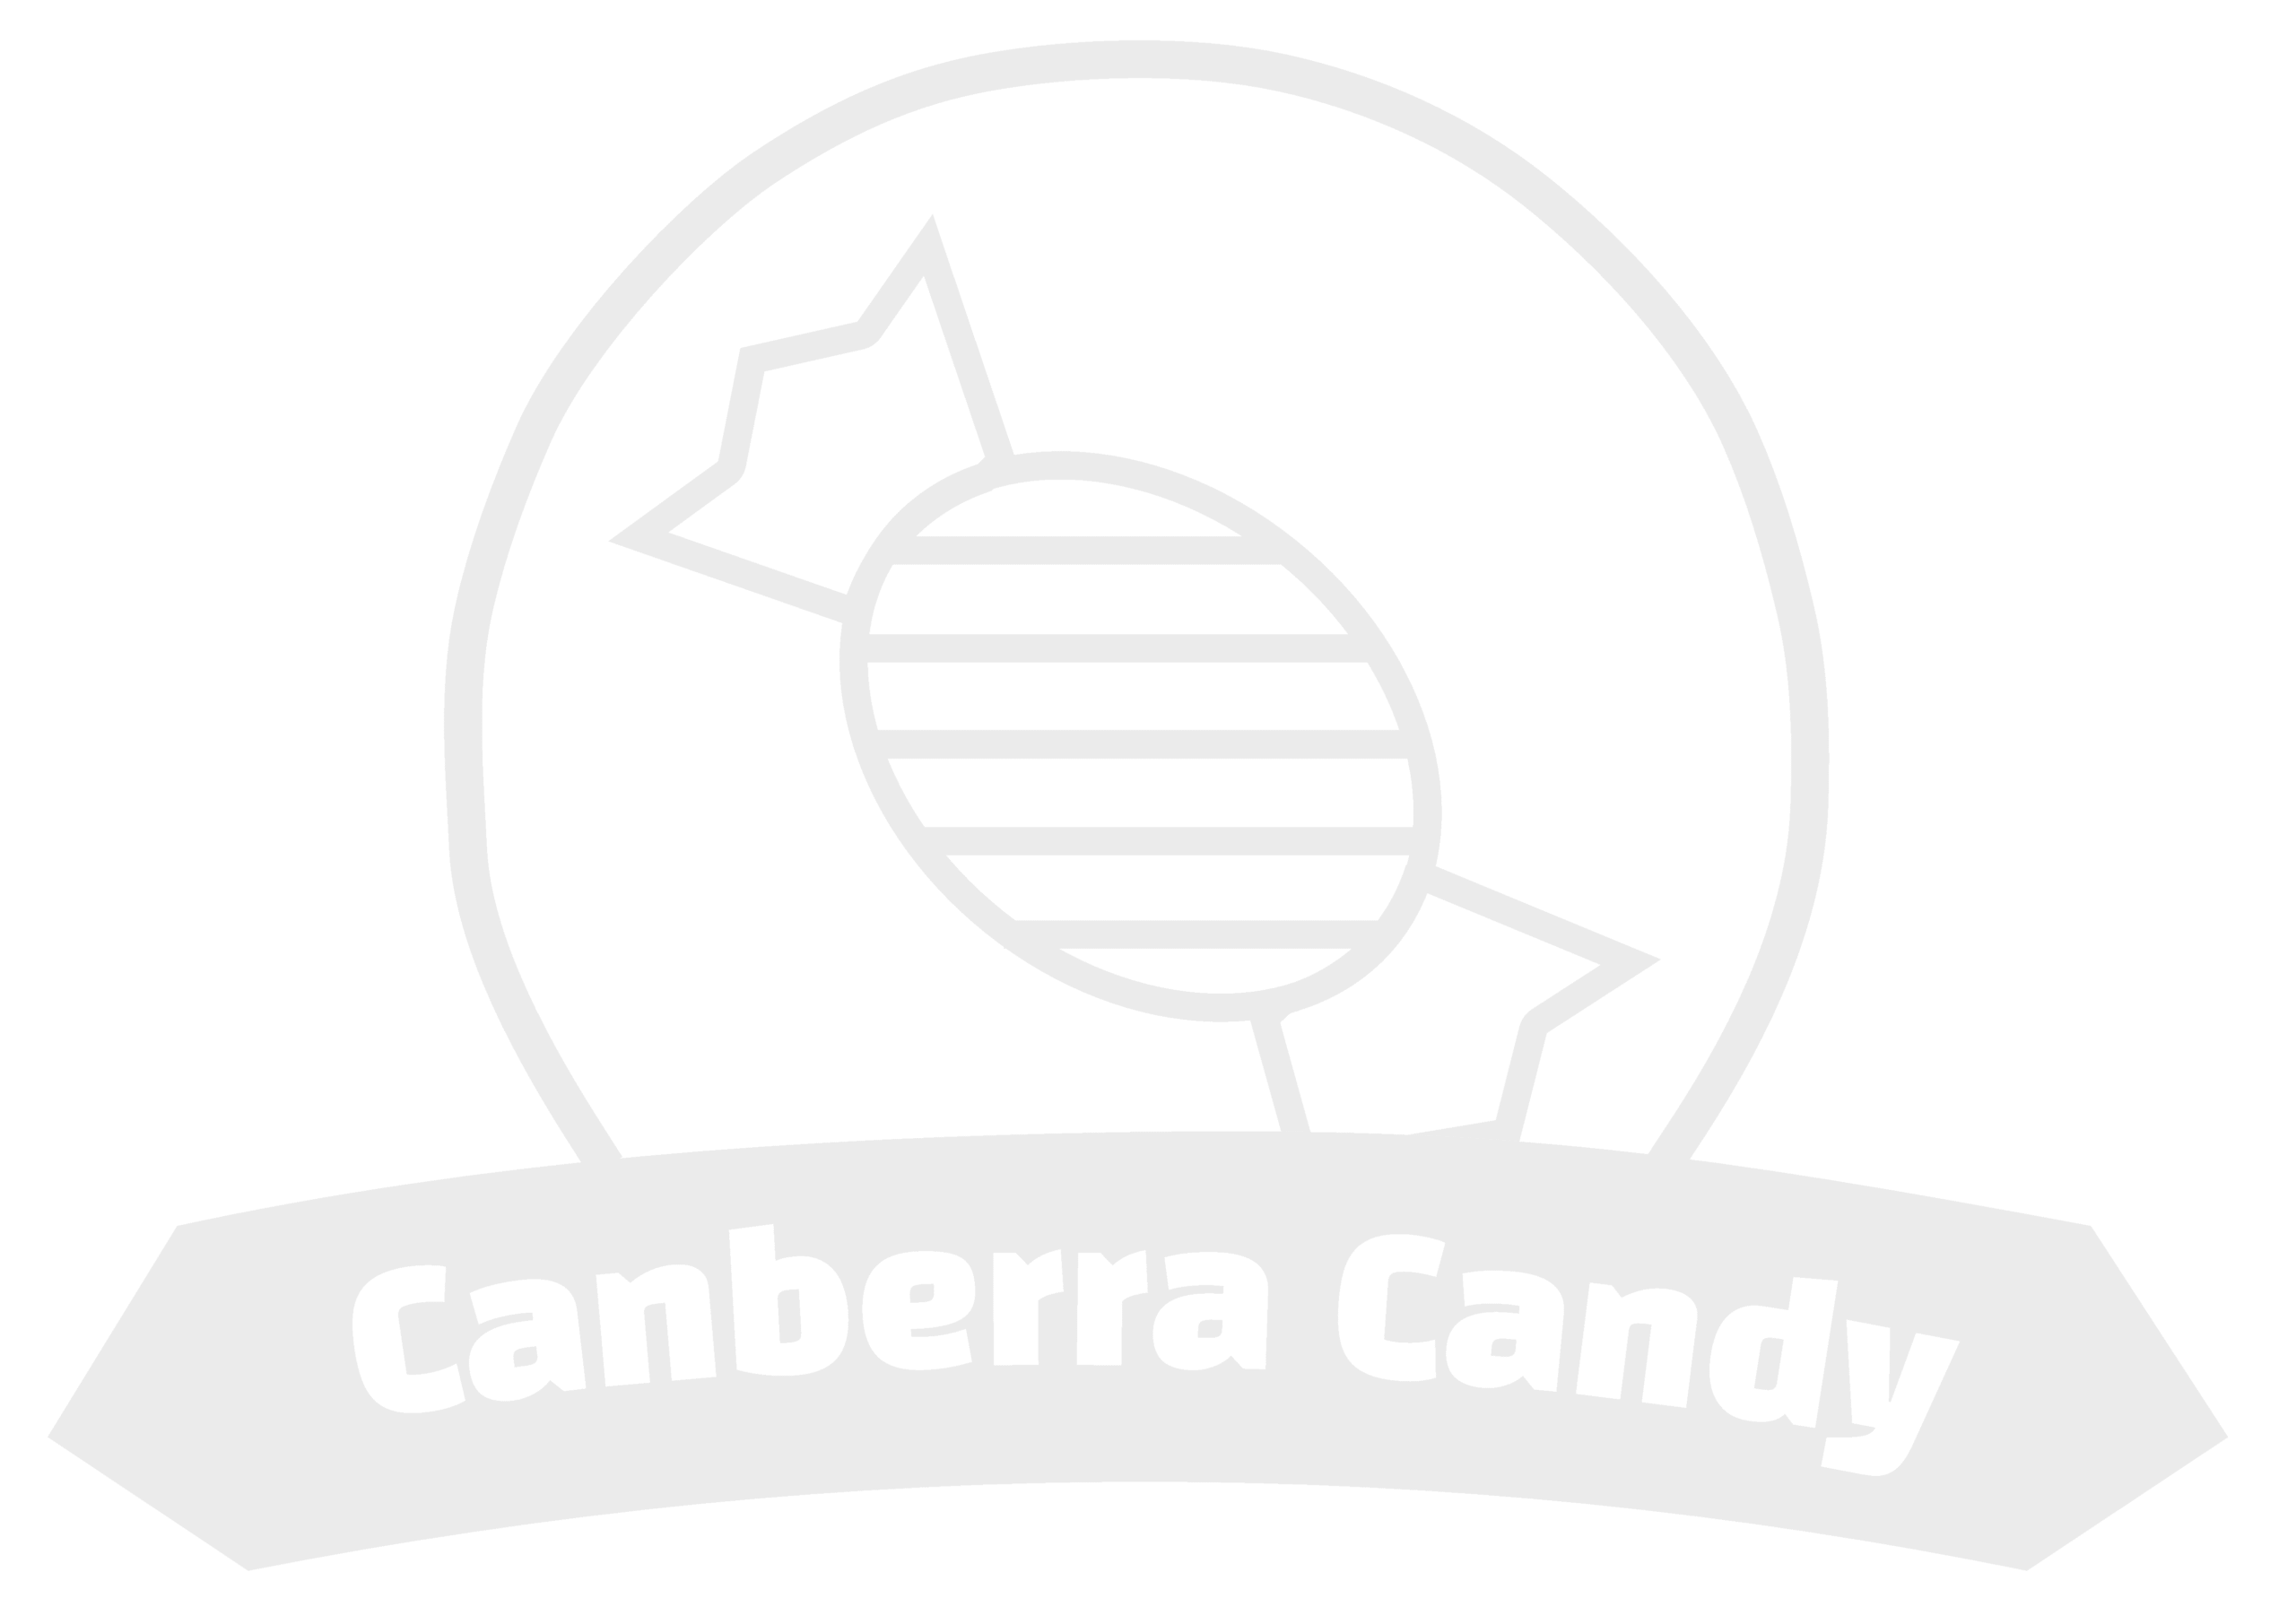 Canberra Candy